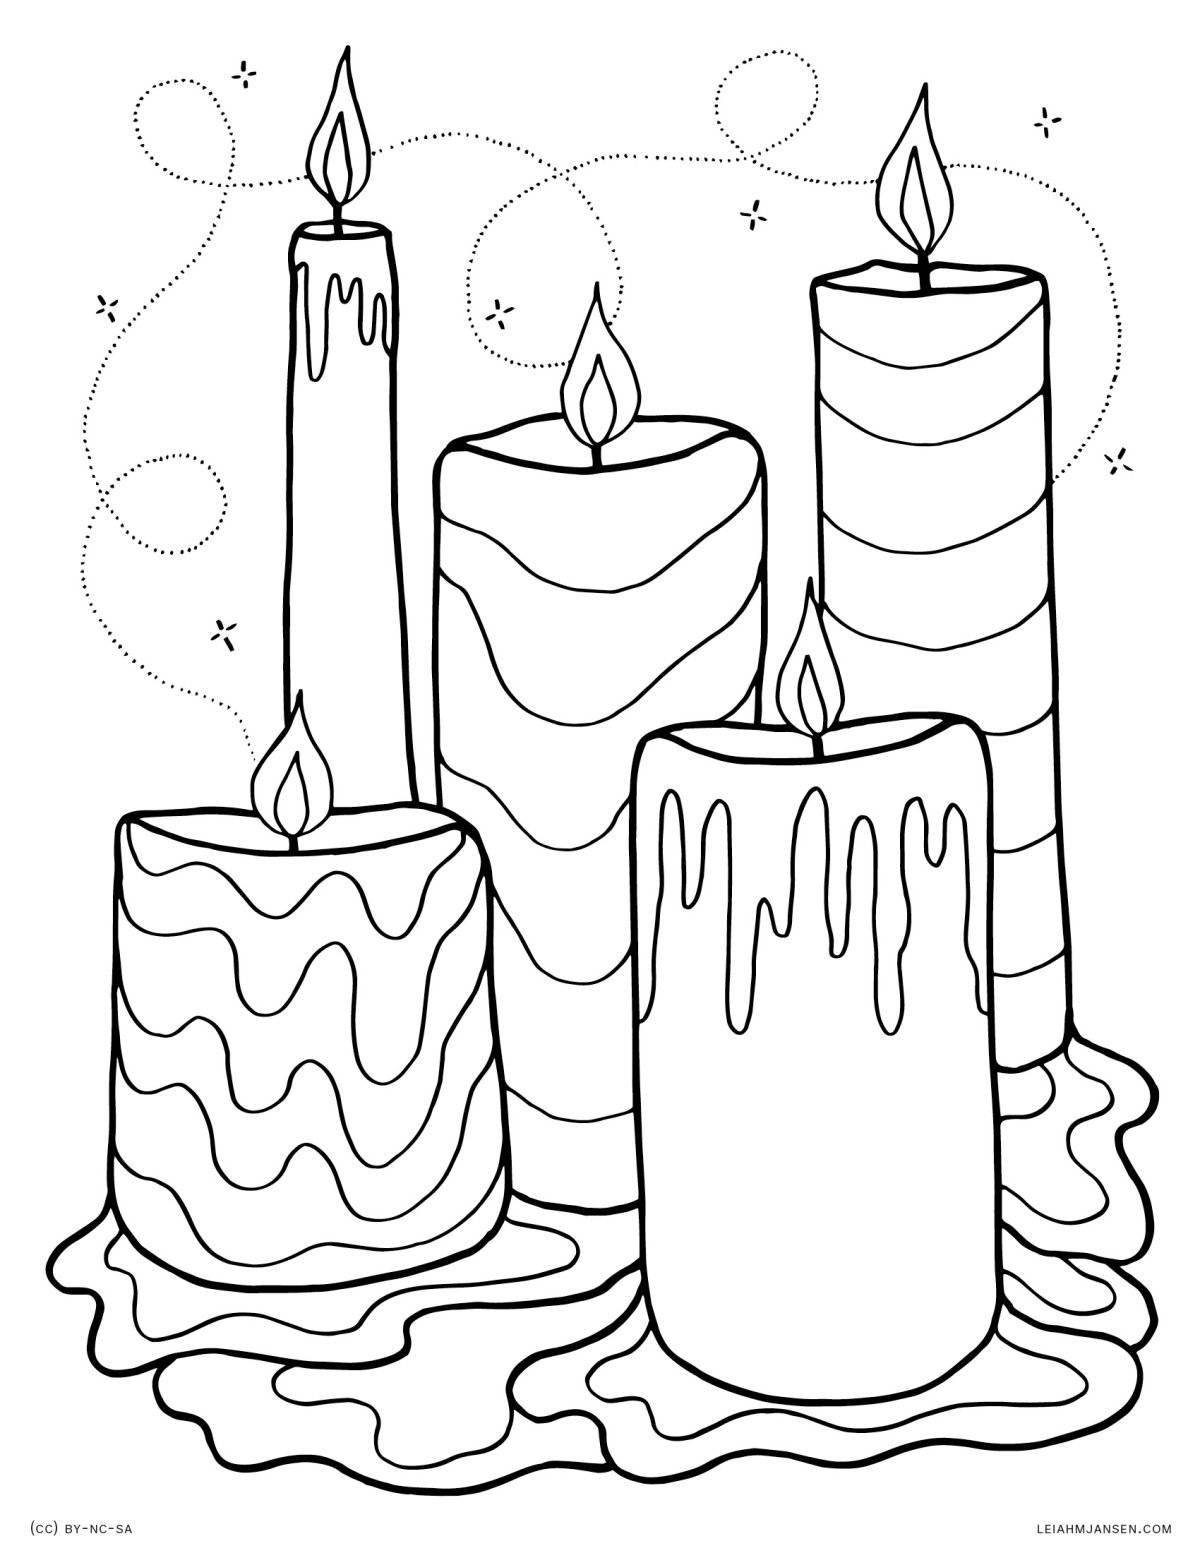 Playful candle coloring page for kids